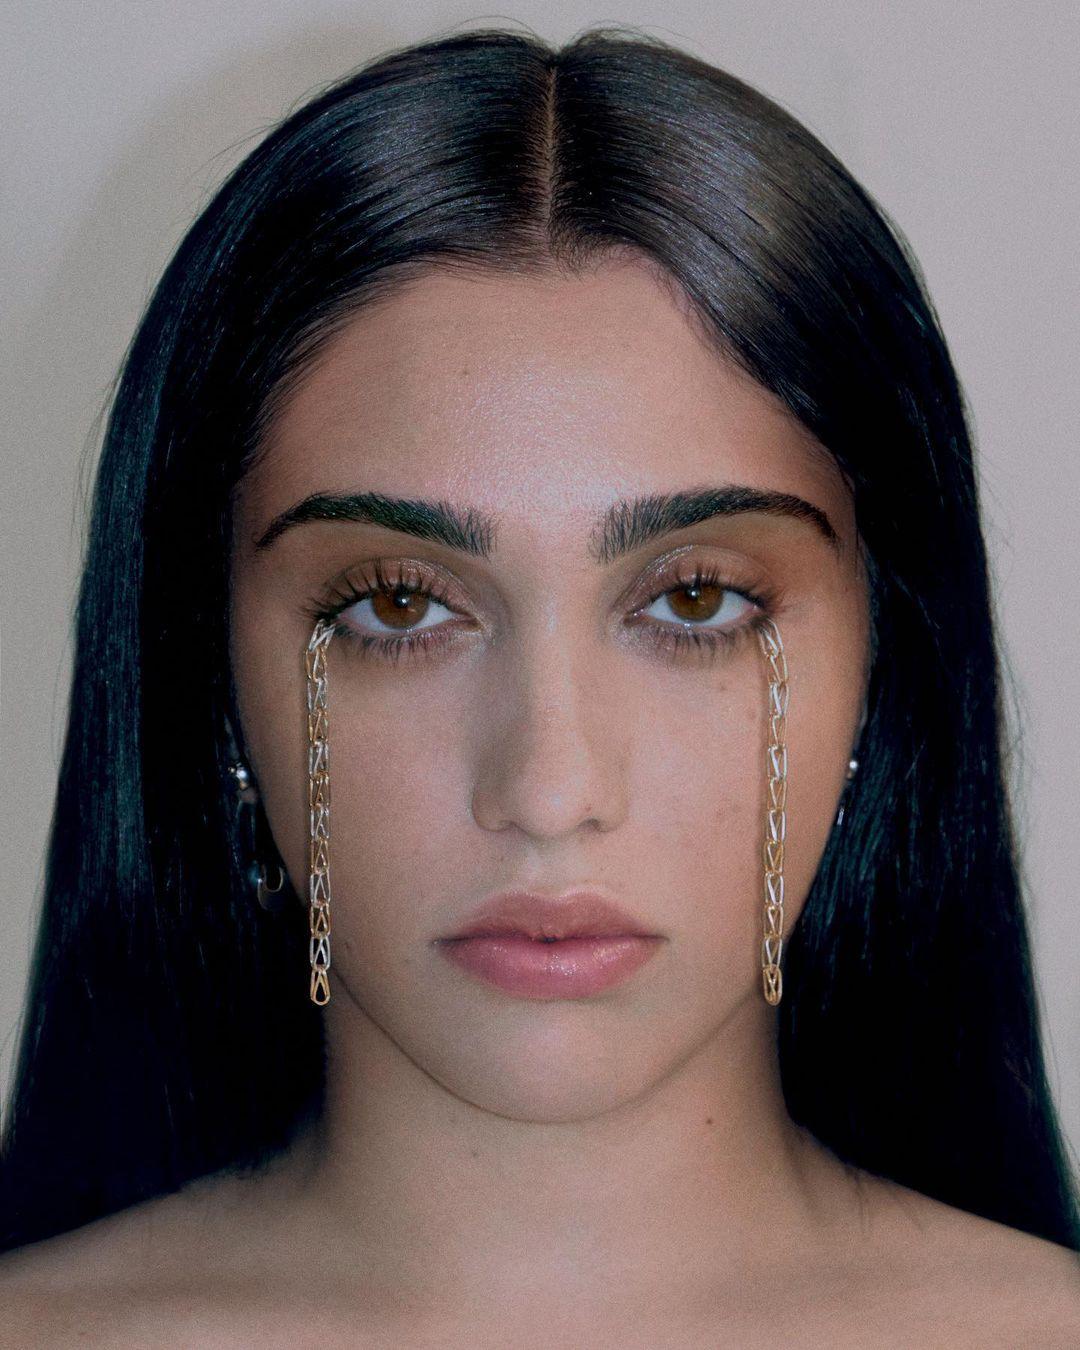 A portrait shot of Lourdes Leon with chains attached to her lashes.